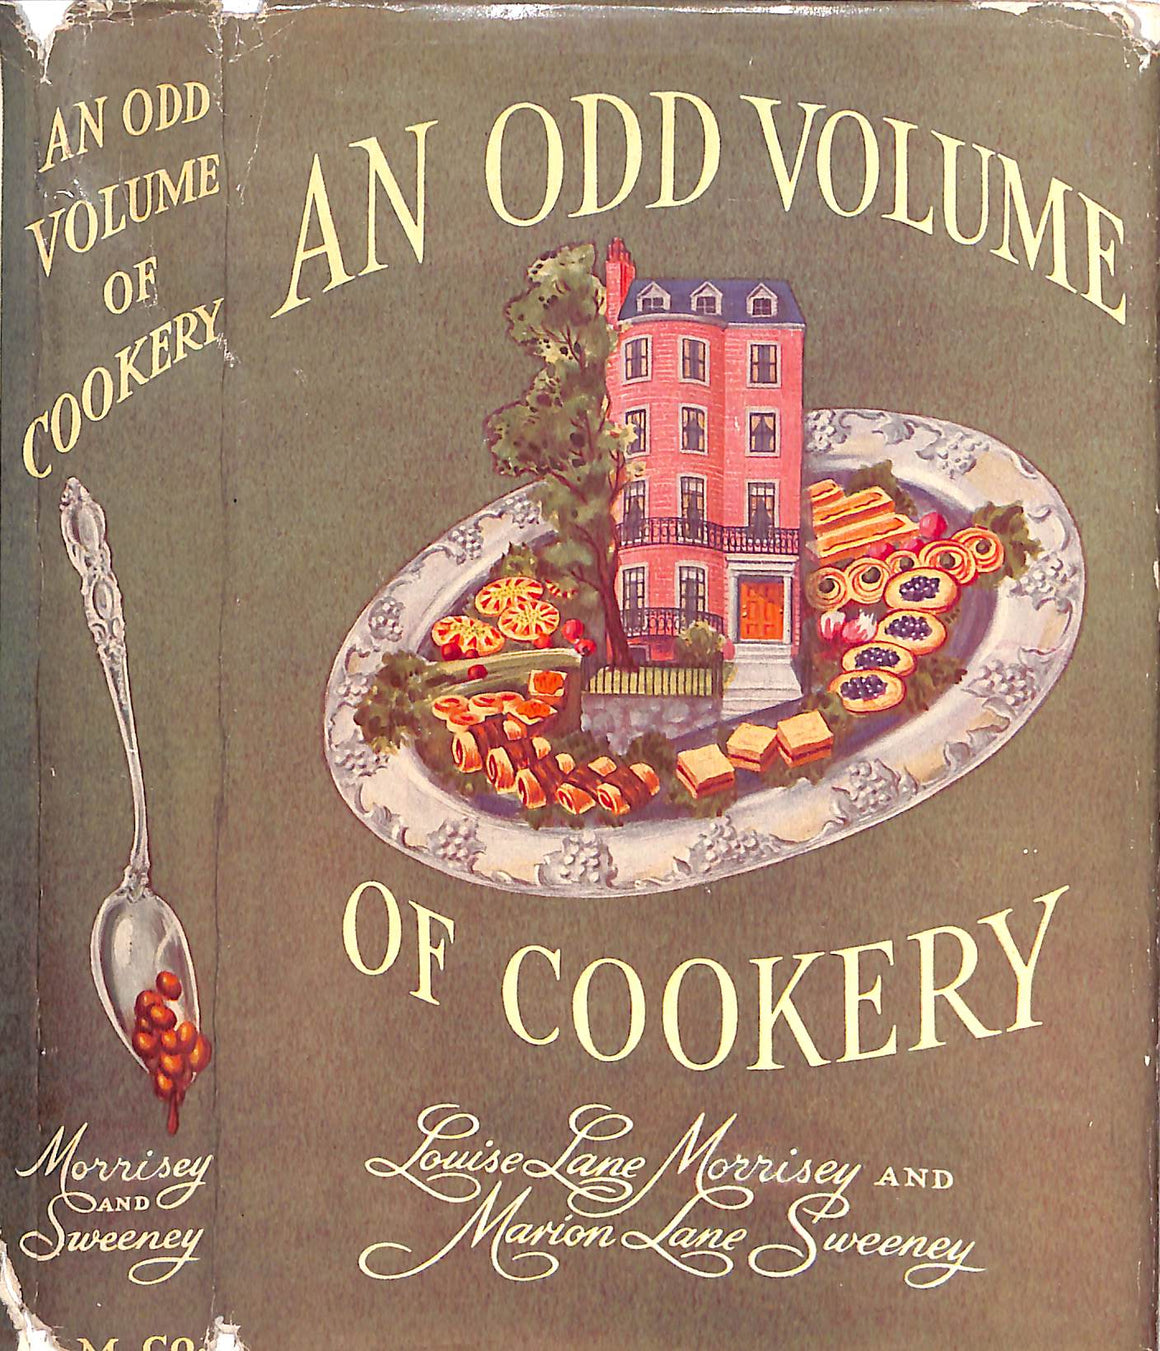 "An Odd Volume Of Cookery" 1949 MORRISEY, Louise Lane and SWEENEY, Marion Lane